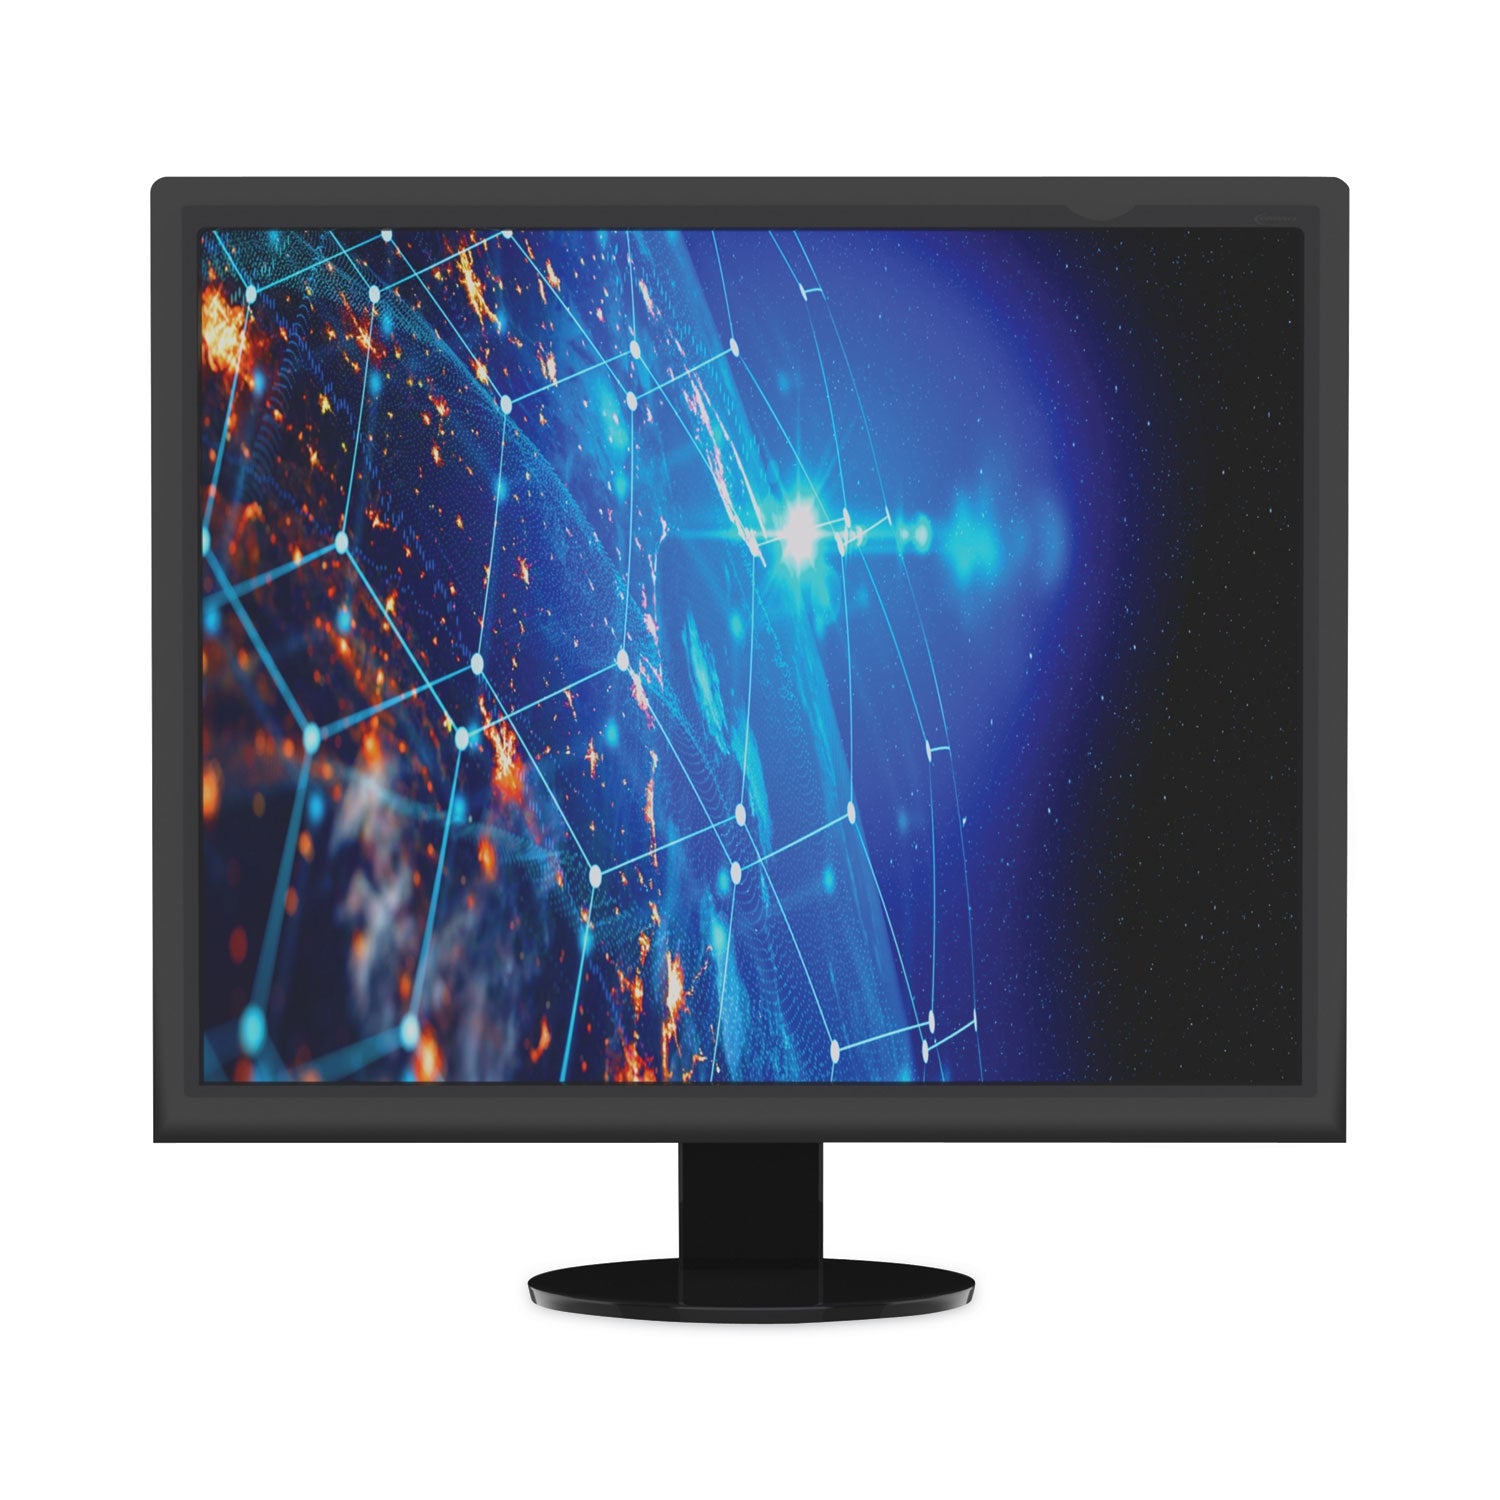 blackout-privacy-monitor-filter-for-201-flat-panel-monitor_ivrblf201 - 4